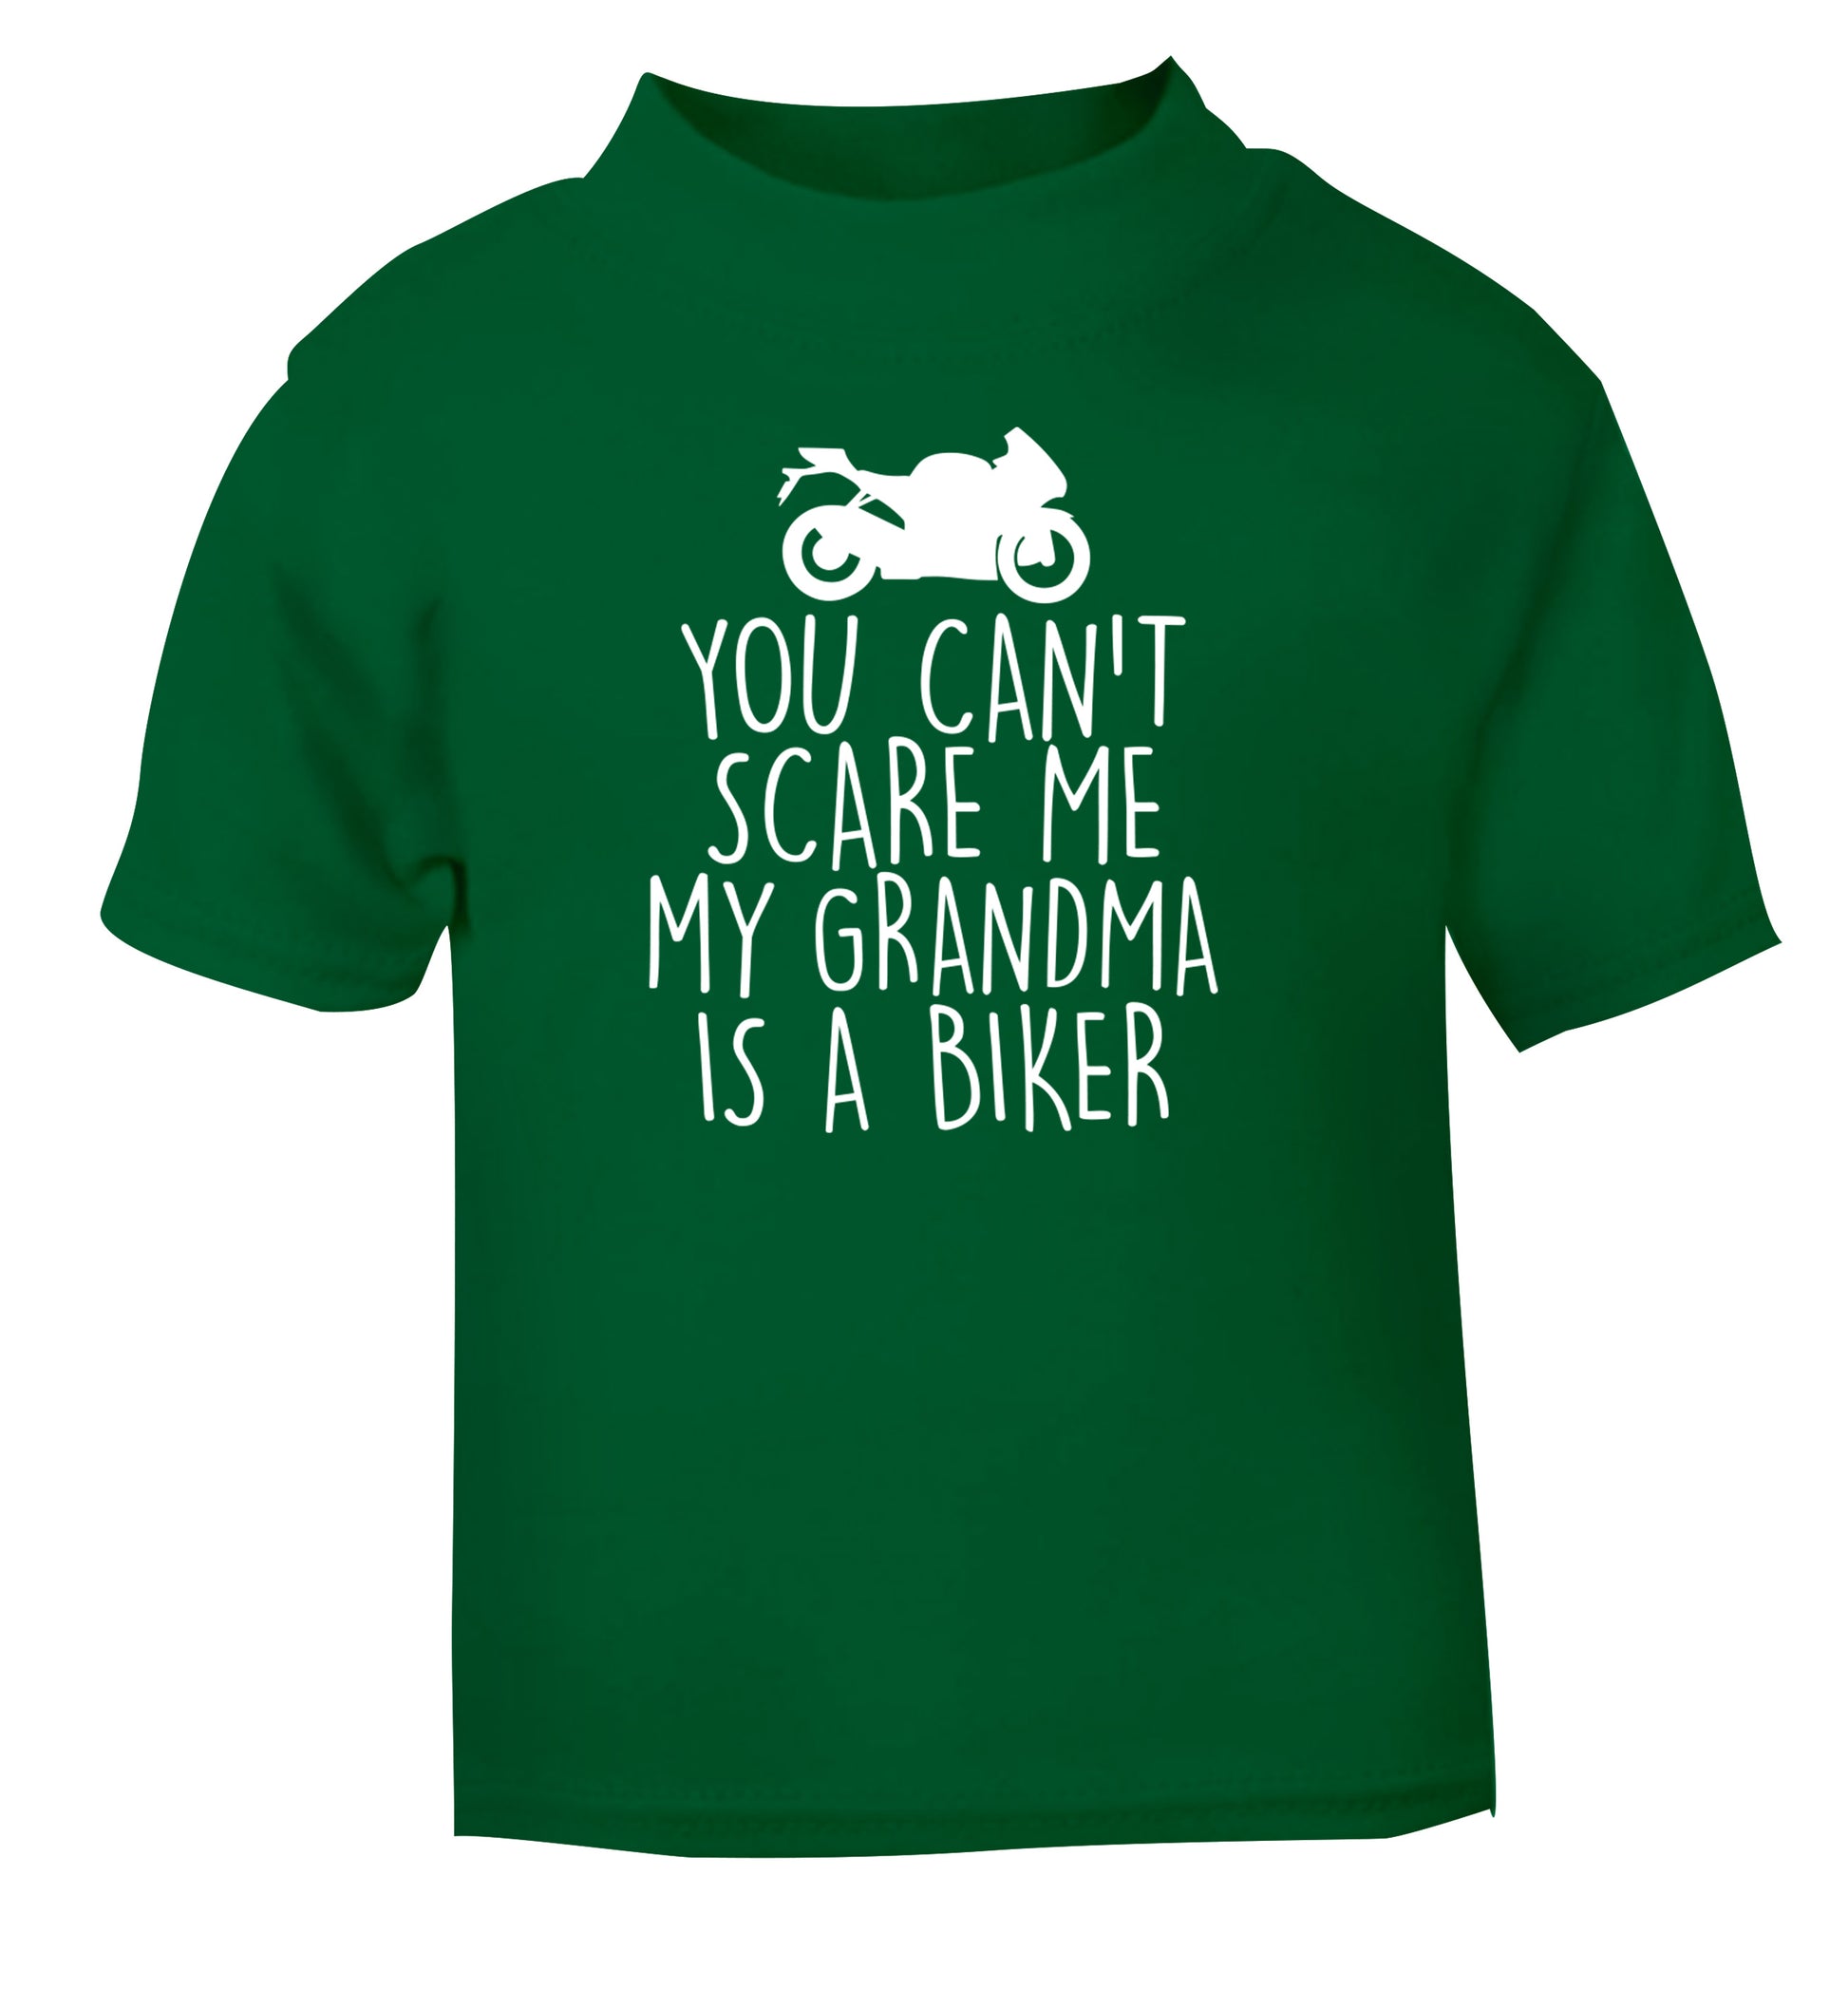 You can't scare me my grandma is a biker green Baby Toddler Tshirt 2 Years